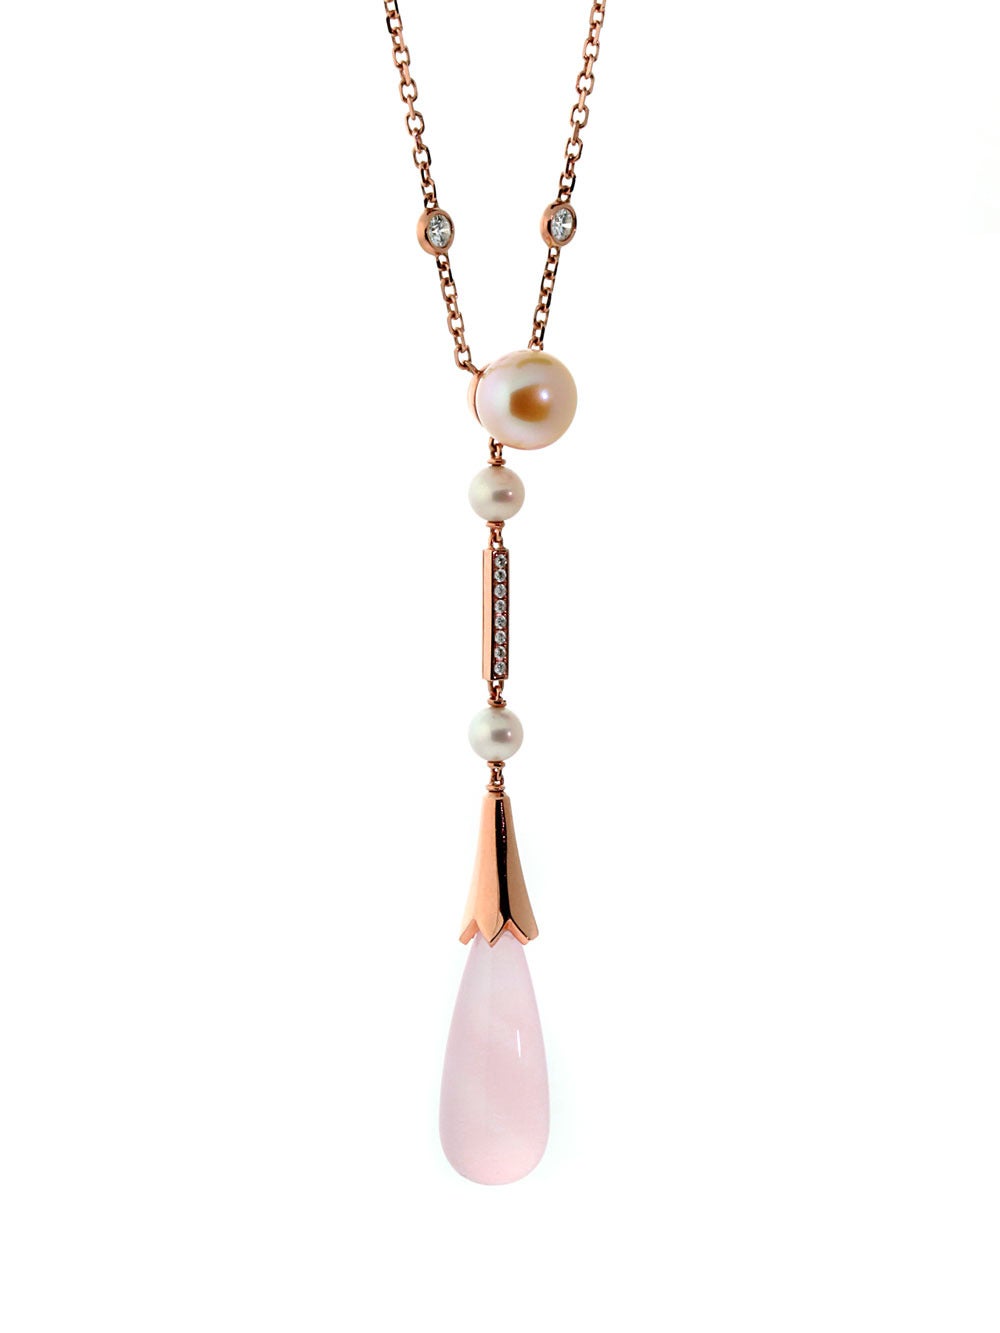 A masterpiece by Cartier featuring a sumptuous pink quartz (17.7ct), the finest Cartier round brilliant cut diamonds (.24ct), and multiple pearls (6.8ct) all set in 18k rose gold.

Necklace Length: 15 3/4″
Dimensions: The pendant has a length of